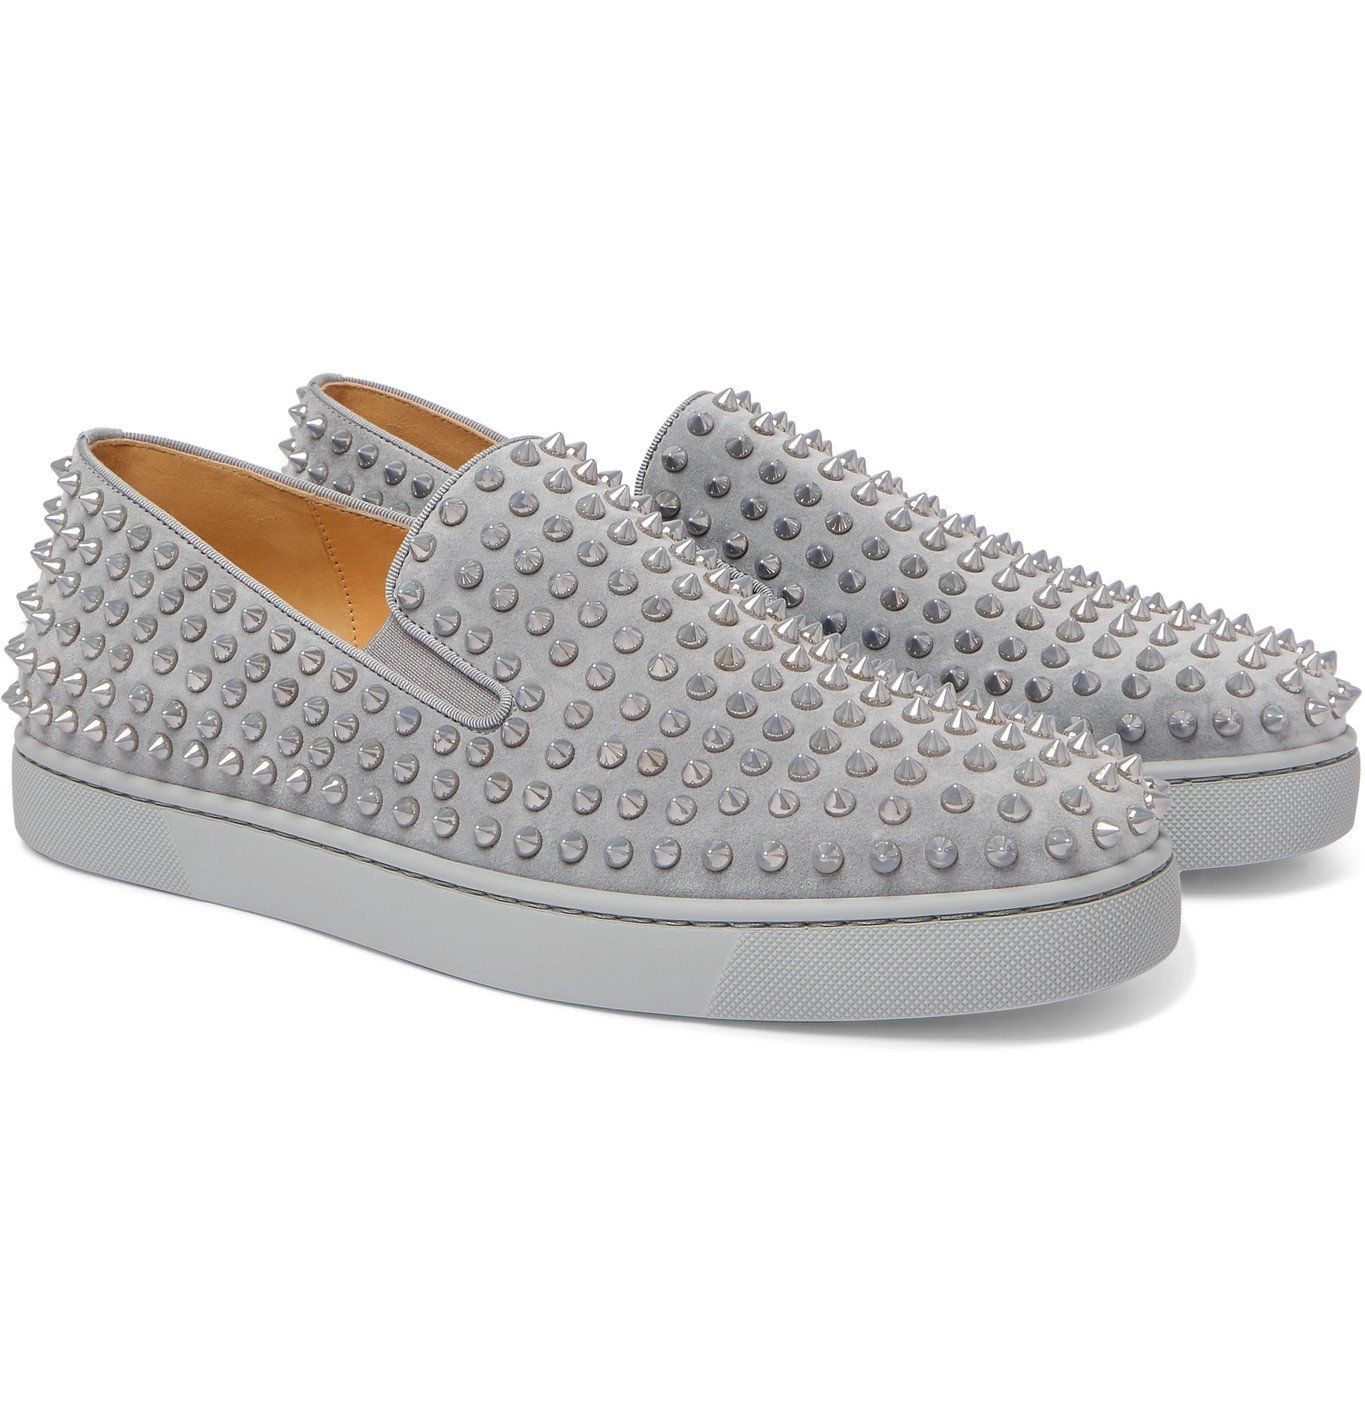 Layouten Sikker innovation CHRISTIAN LOUBOUTIN - Roller-Boat Spiked Suede Slip-On Sneakers - Gray Christian  Louboutin